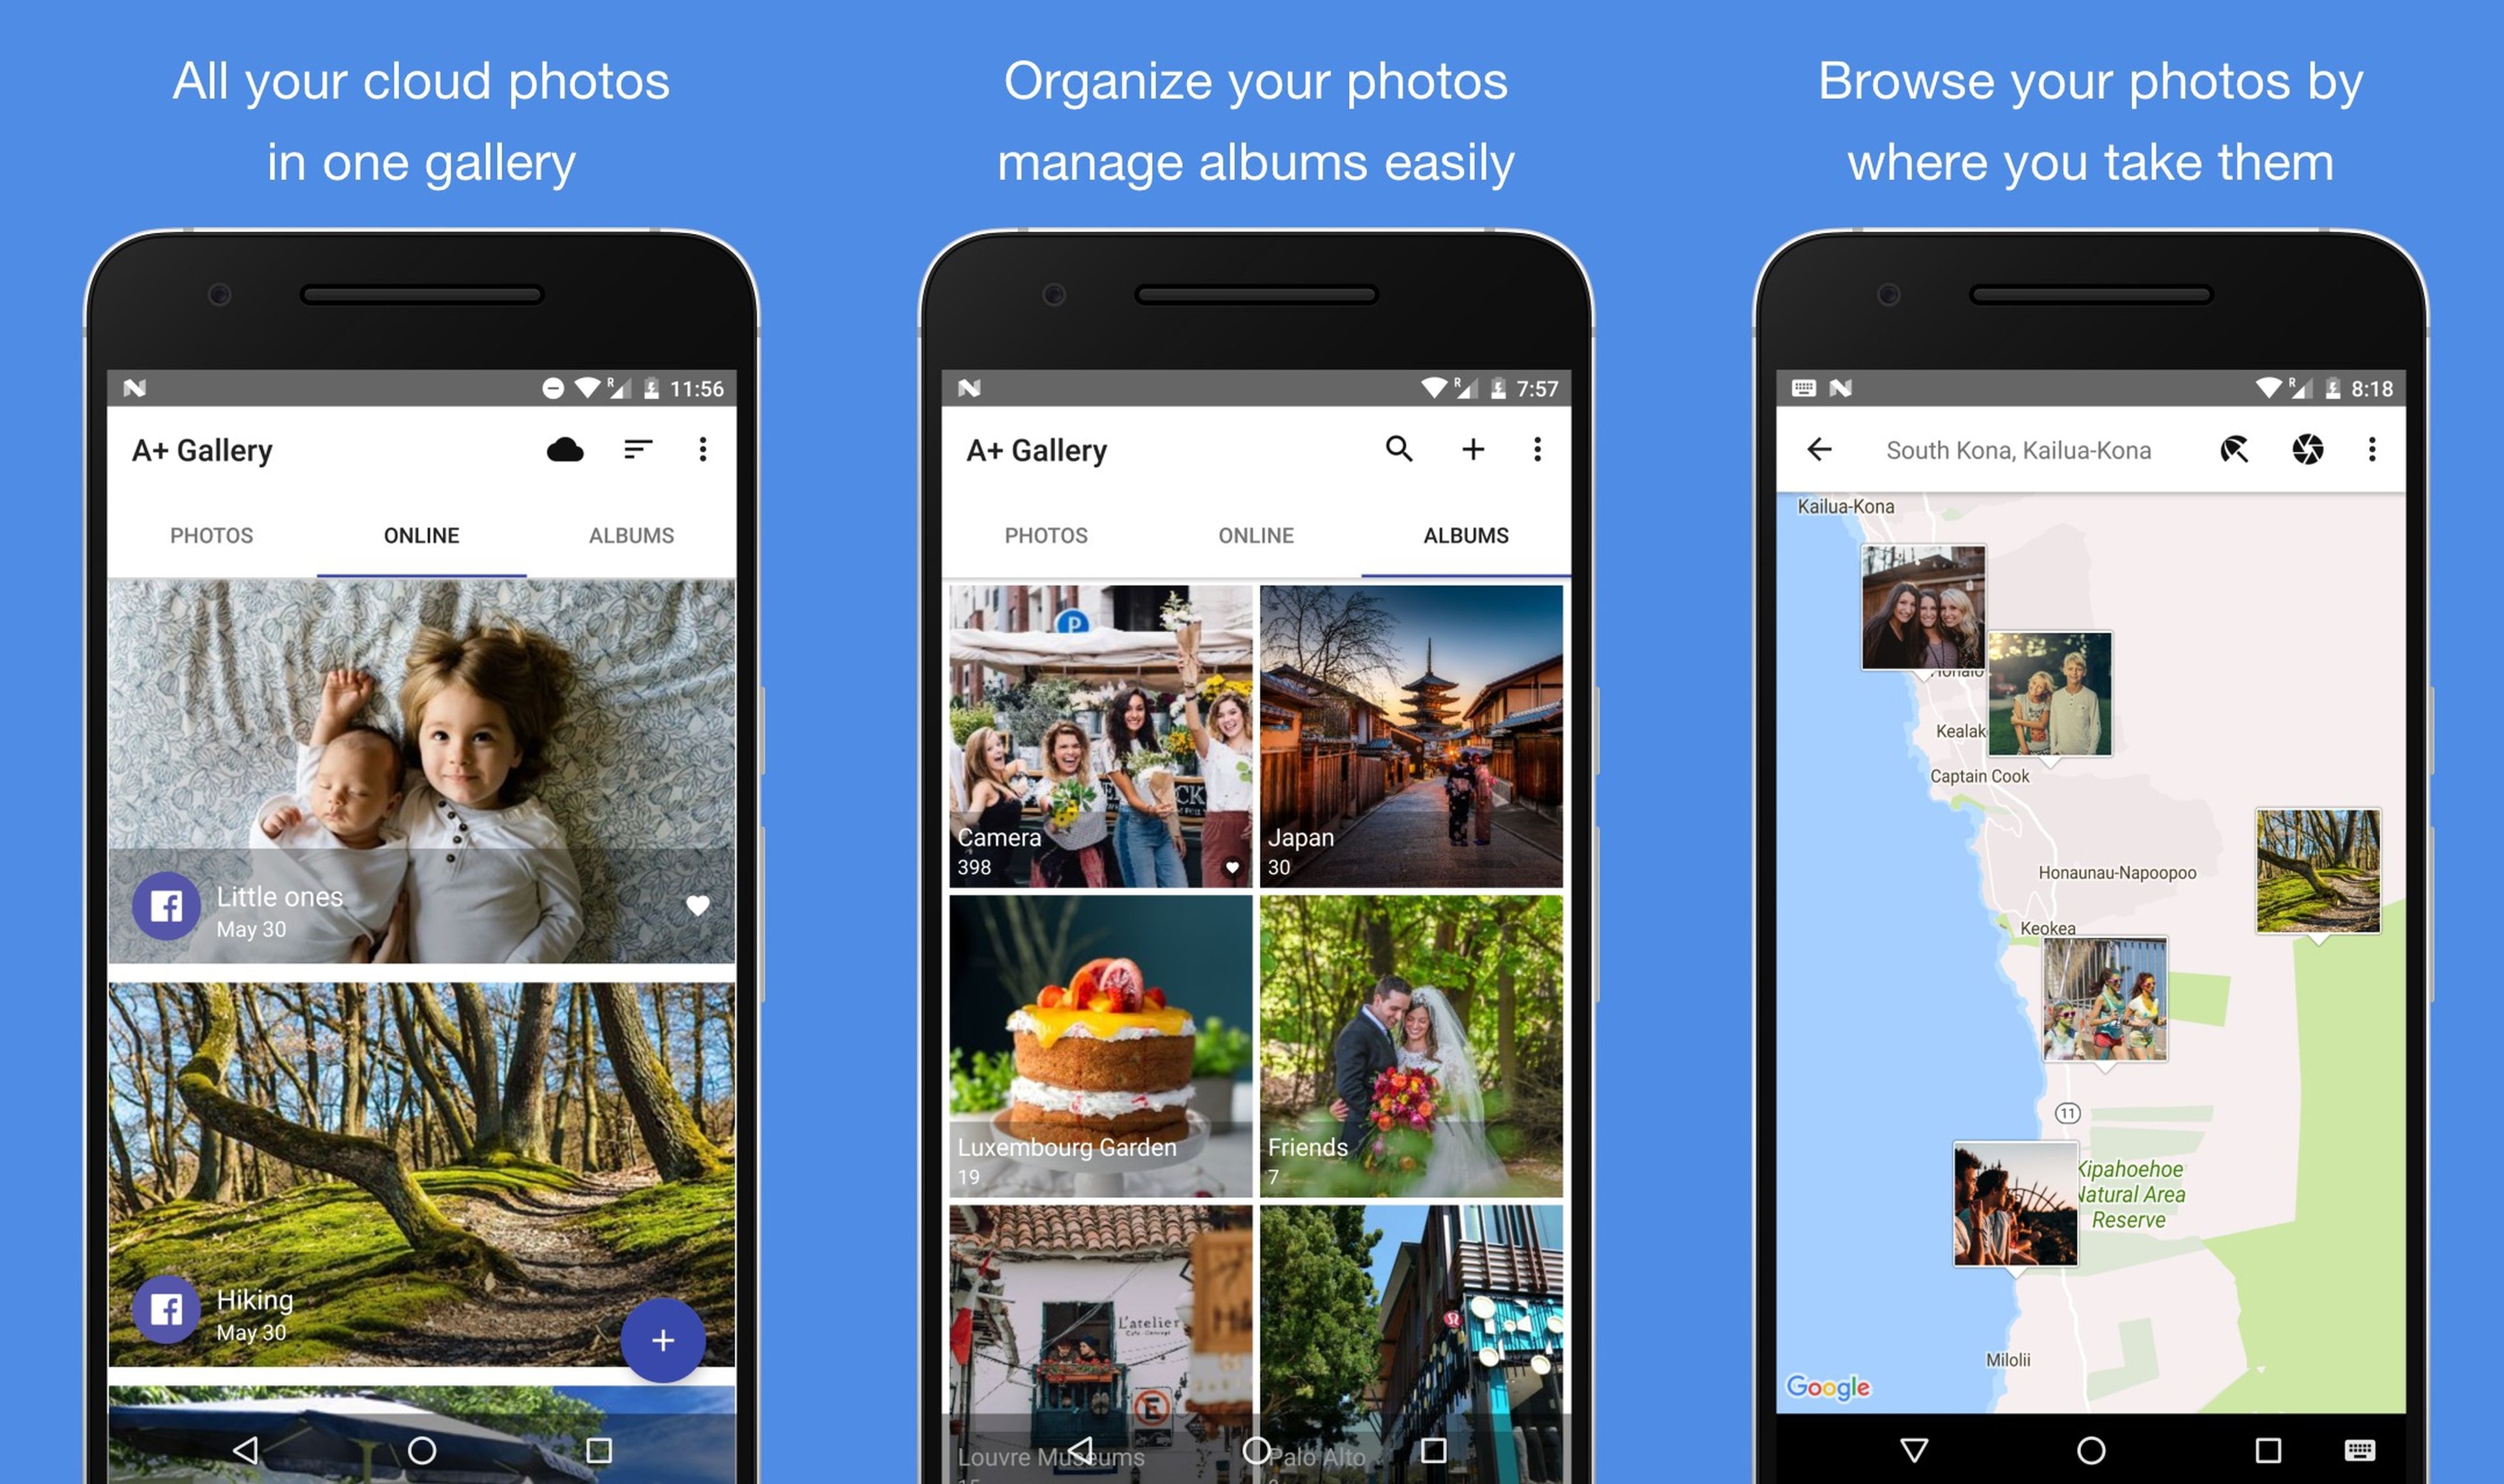 The best galleries where you can organize all your photos on Android